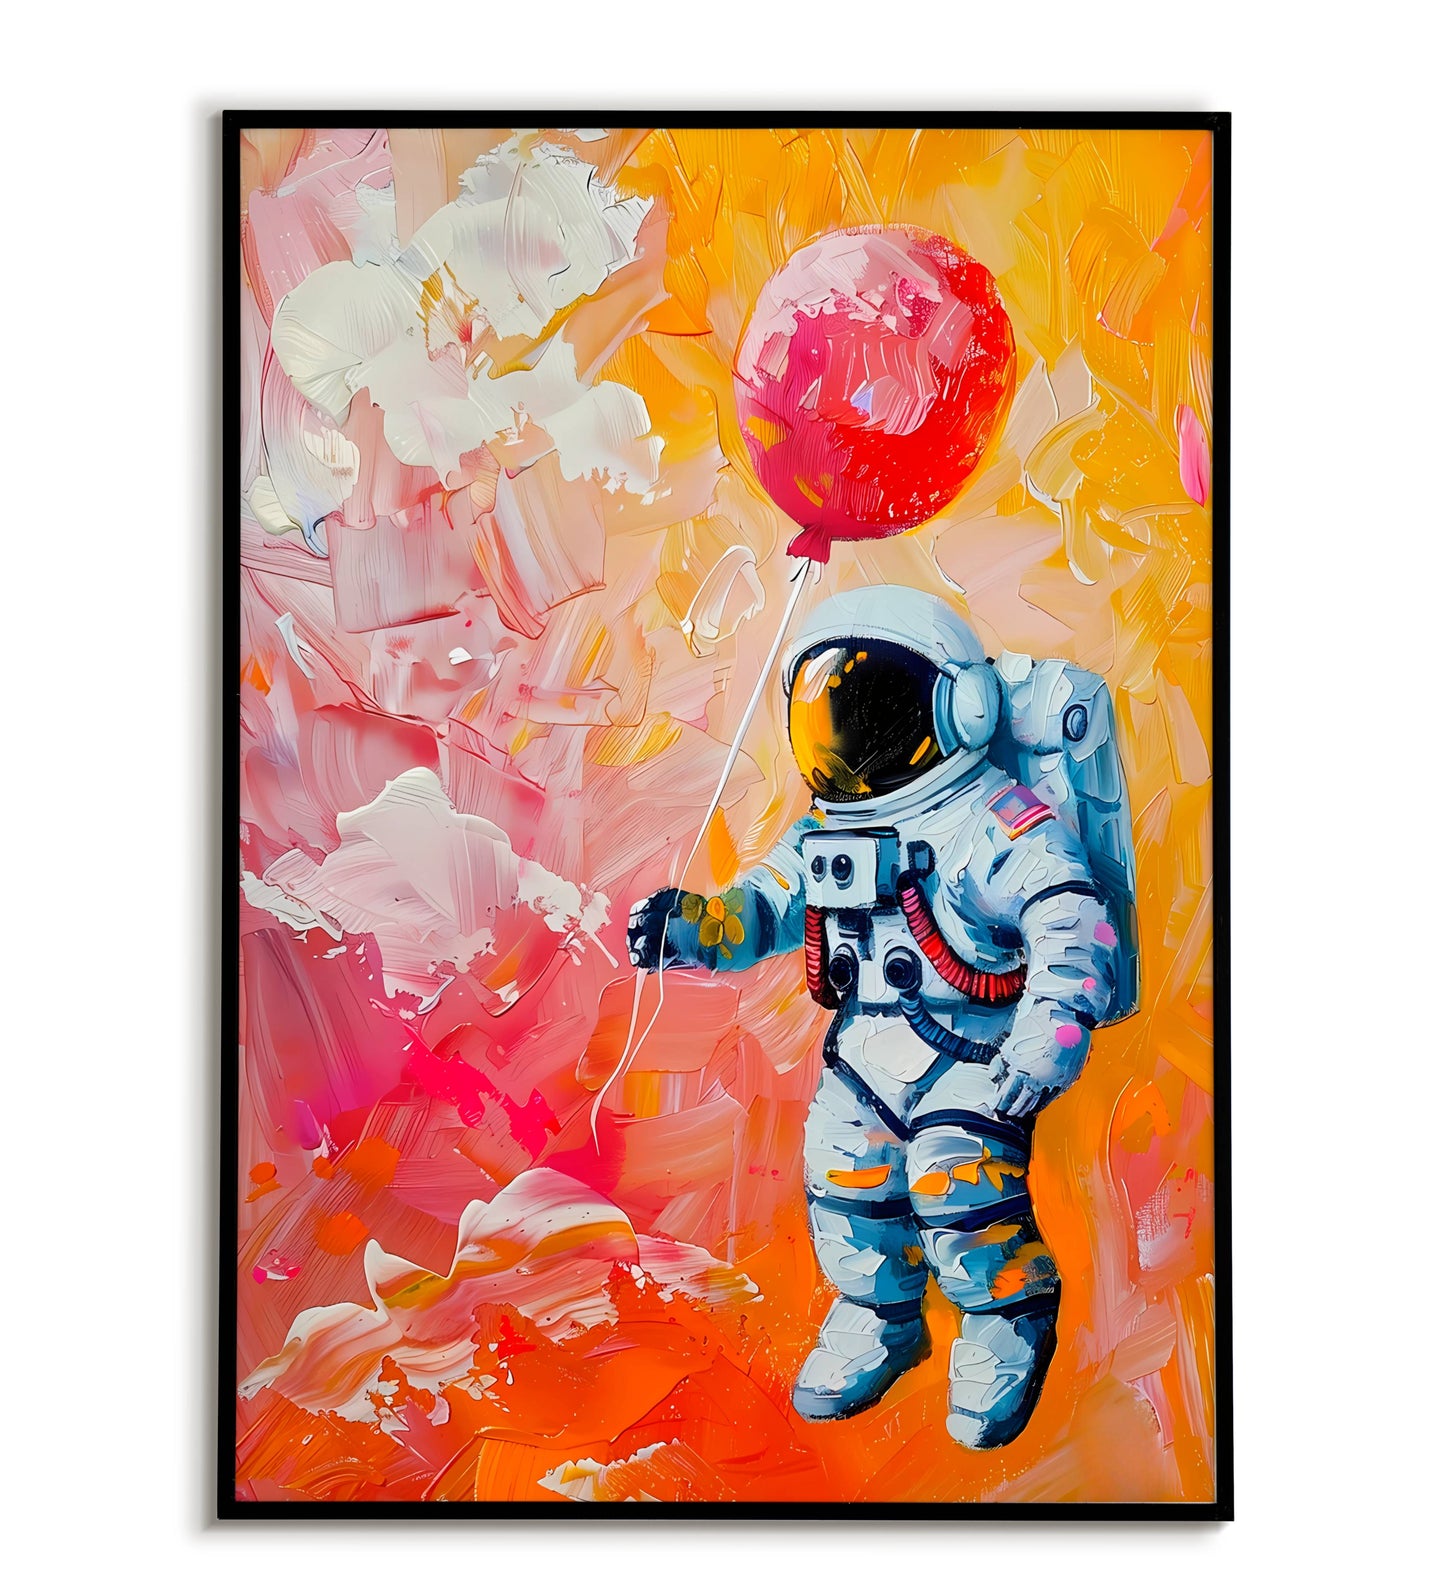 Astronaut's Dream: An astronaut floats in space, holding a colorful balloon. Available for purchase as a physical poster or digital download